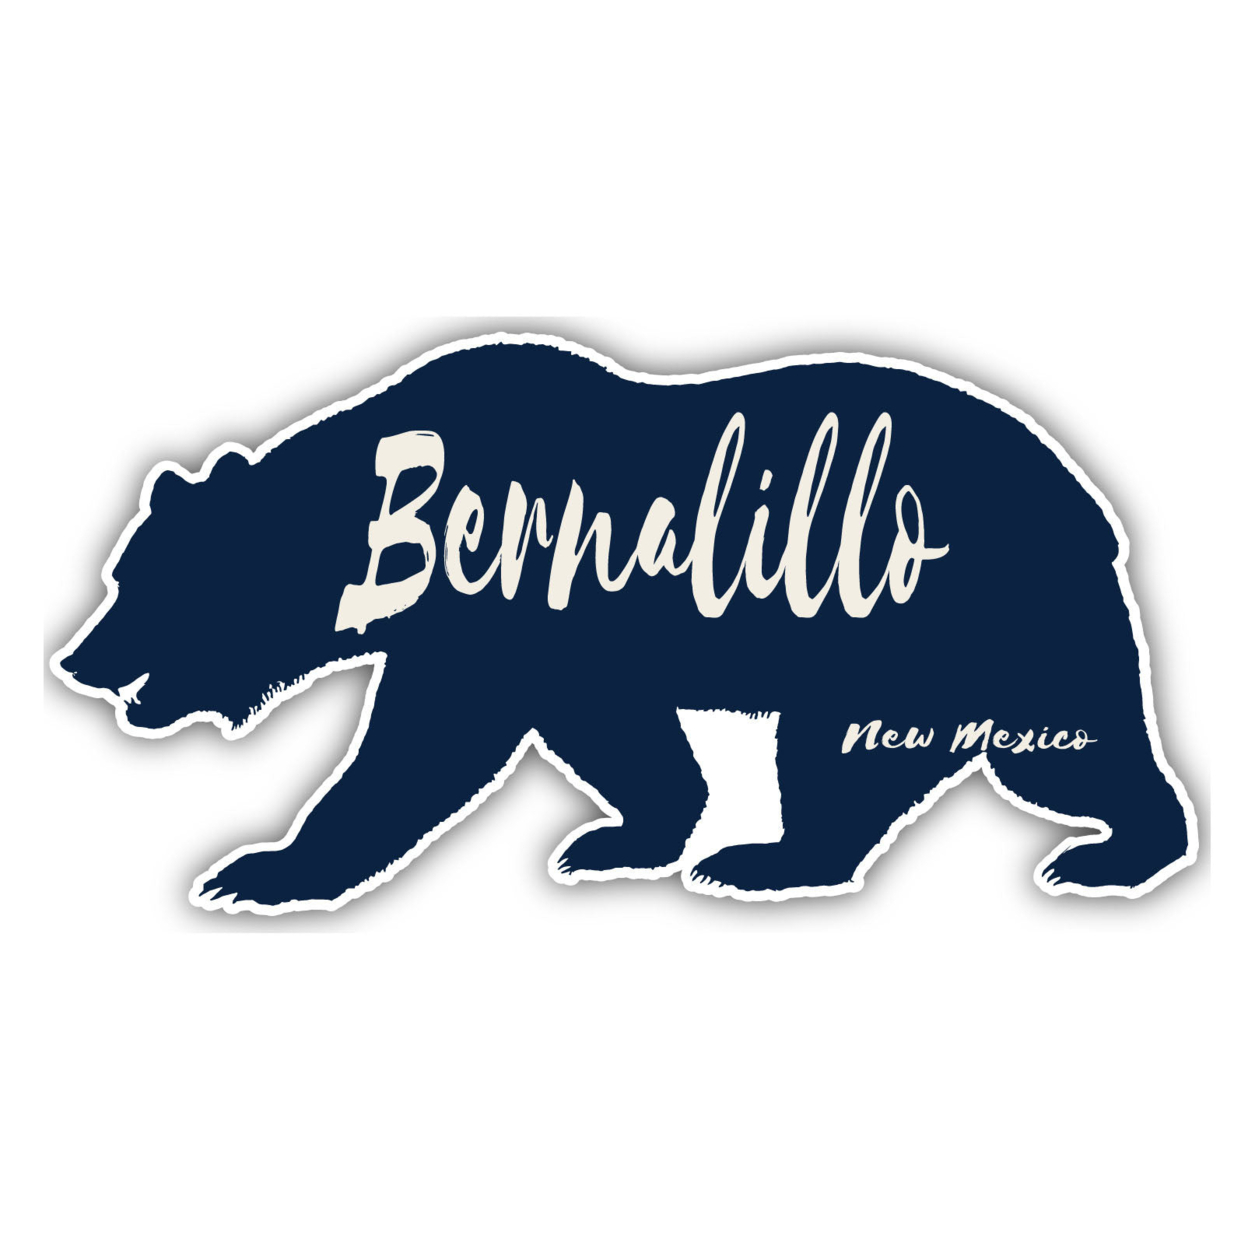 Bernalillo New Mexico Souvenir Decorative Stickers (Choose Theme And Size) - 4-Pack, 2-Inch, Camp Life